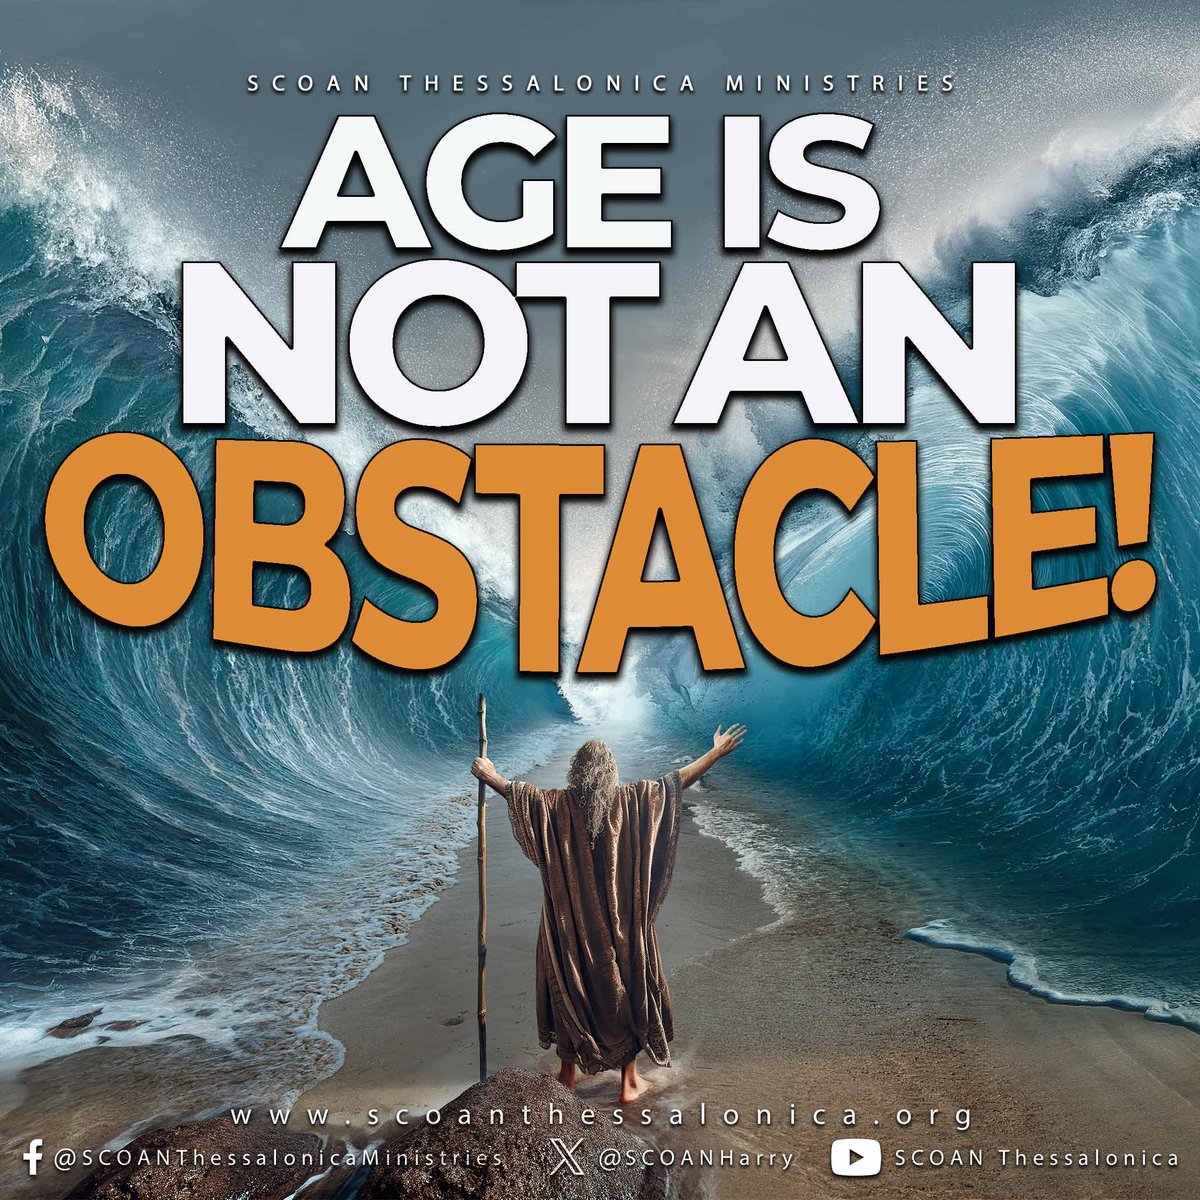 ''People can grow old at 16 if they give up their ideals, let their minds become confused by pessimism, or allow worry, despair, fear or anxiety to stop them from making important decisions about their lives!'' - T. B. Joshua

#AgeIsANumber #YoungOrOld
🌐scoanthessalonica.org